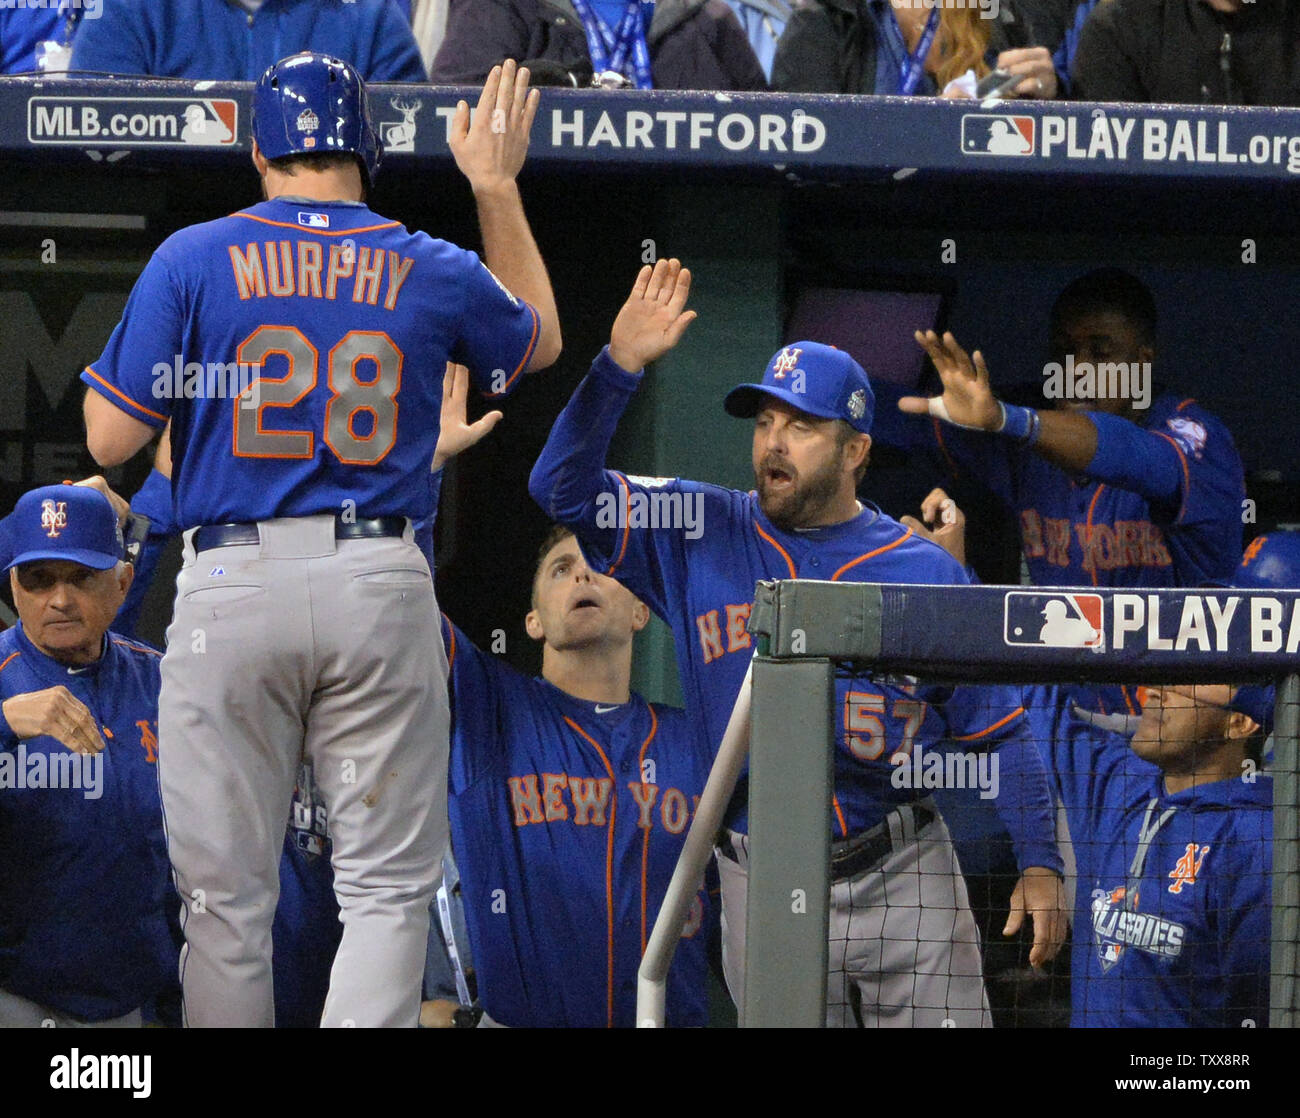 New York Mets second baseman Daniel Murphy receives high fives in dugout after scoring in the fourth inning on RBI single by teammate Travis d'Arnaud against the Kansas City Royals in game 1 of the World Series at Kauffman Stadium in Kansas City, Missouri on October 27, 2015. The Royals will play the New York Mets in the 2015 World.  Photo by Kevin Dietsch/UPI Stock Photo